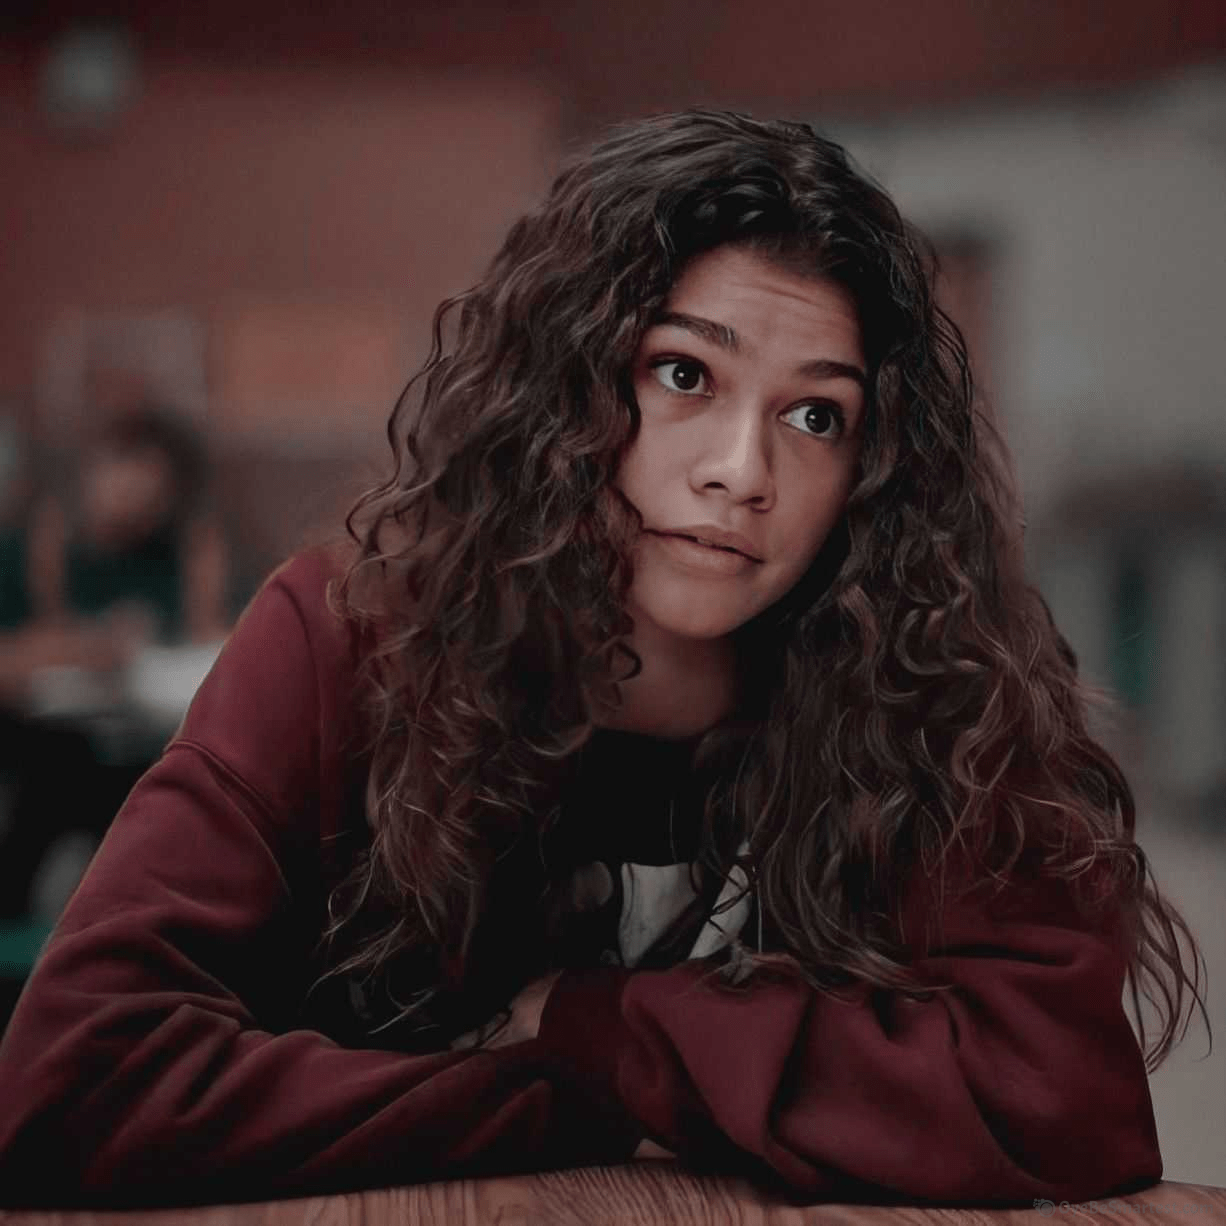 A woman with curly hair sitting at a table. - Euphoria, Zendaya